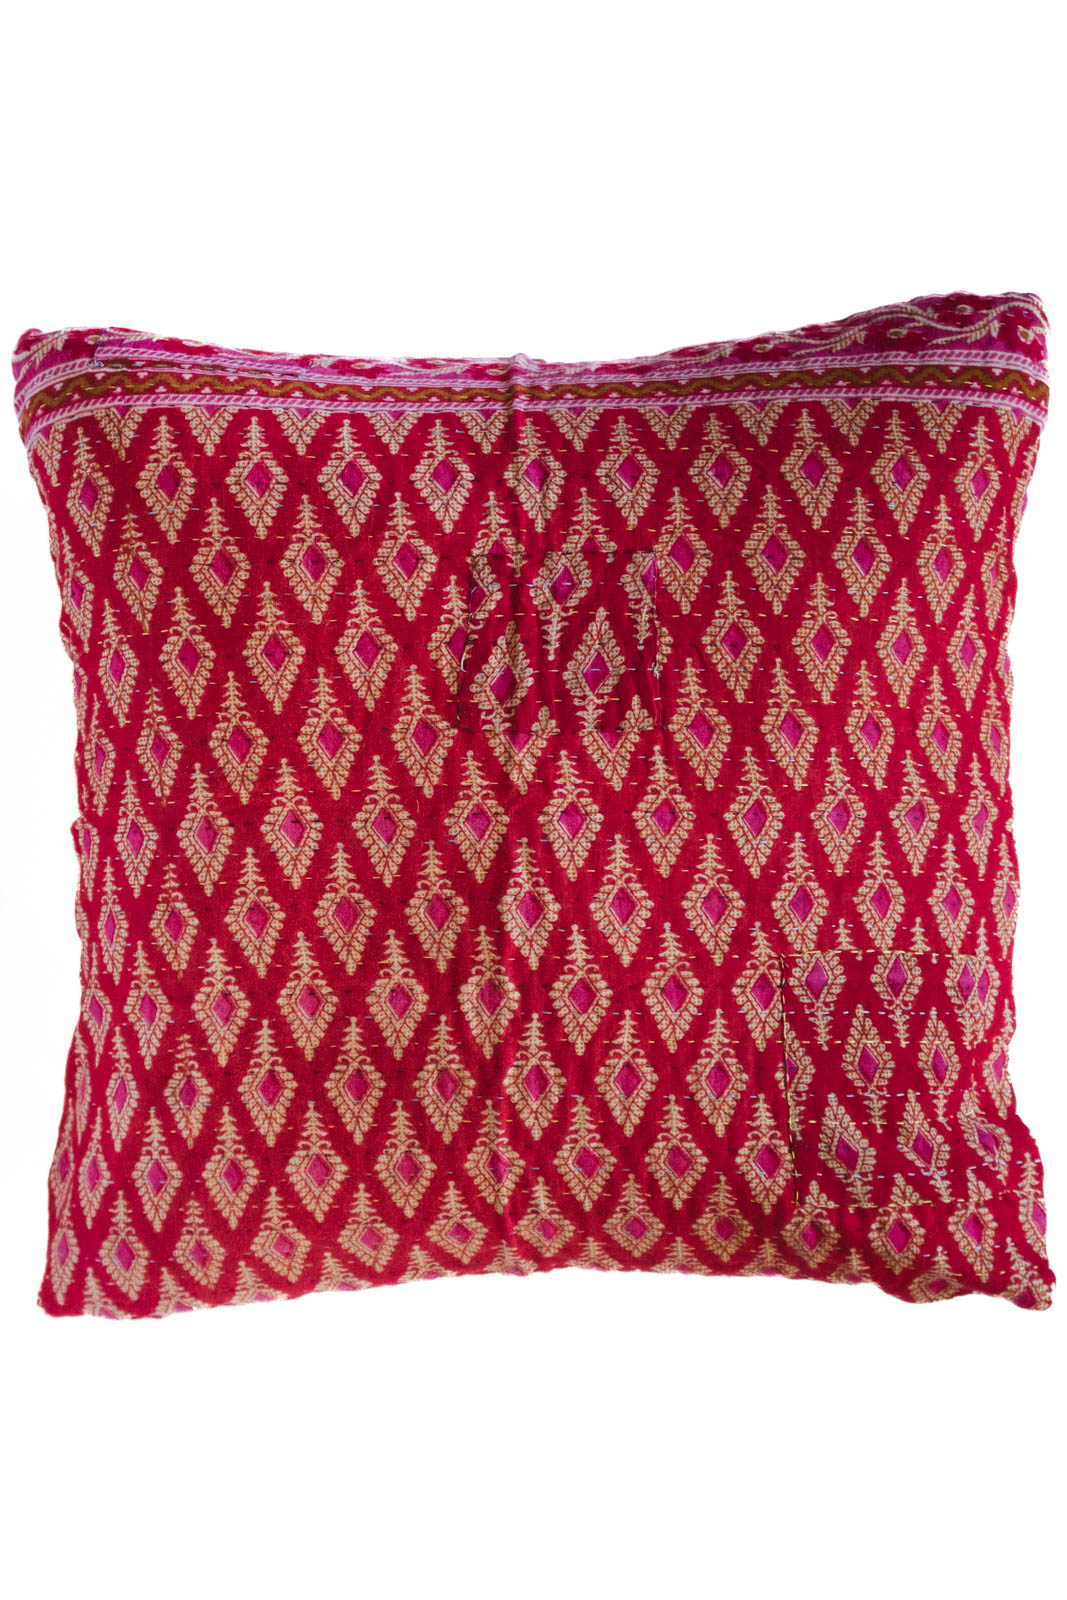 Worthy no. 1 Kantha Pillow Cover